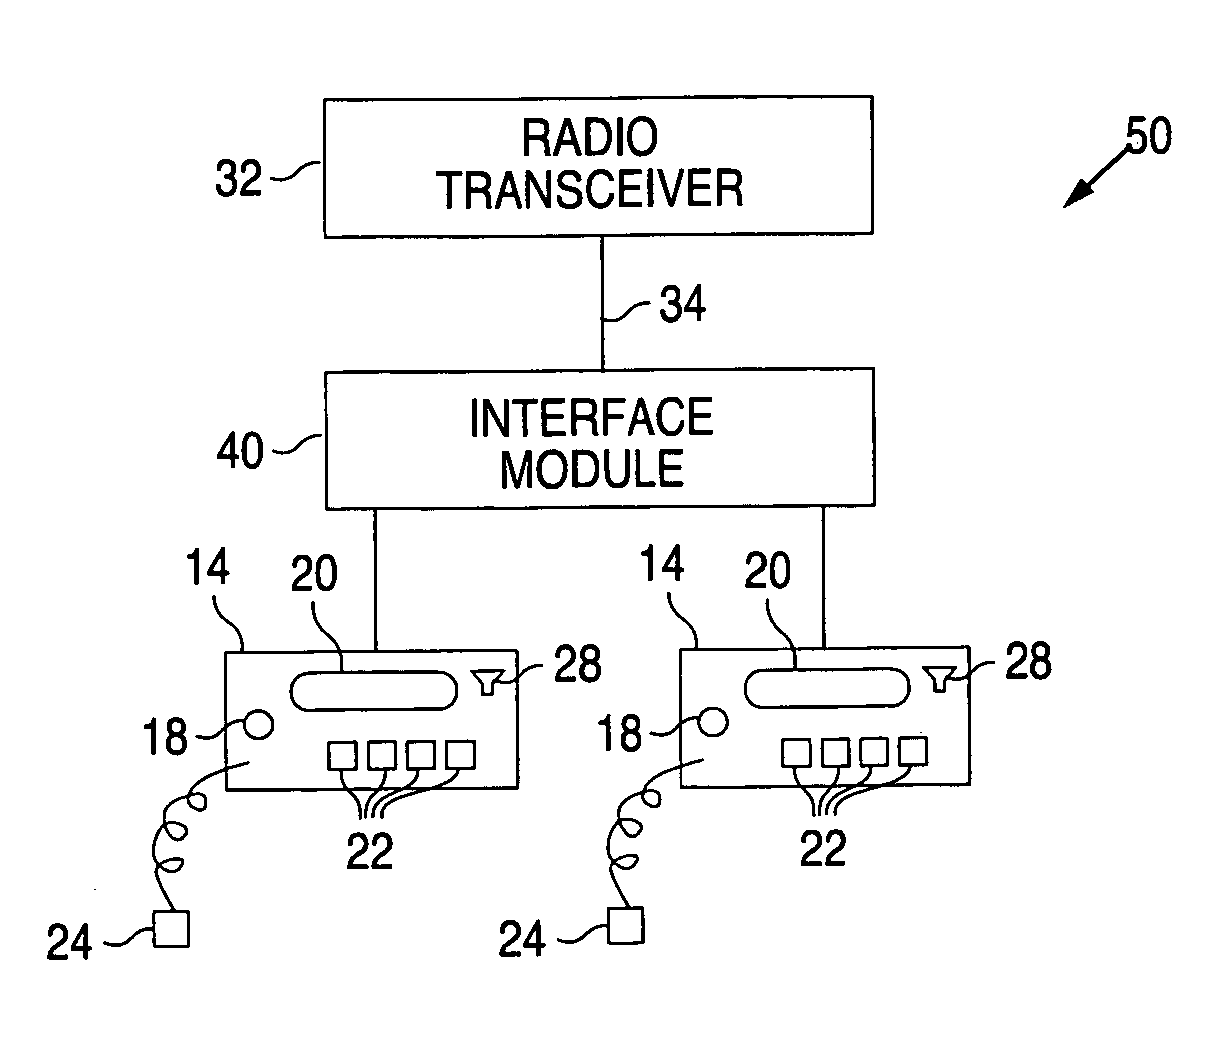 Method and apparatus for enabling dual control head operation of a mobile radio transceiver